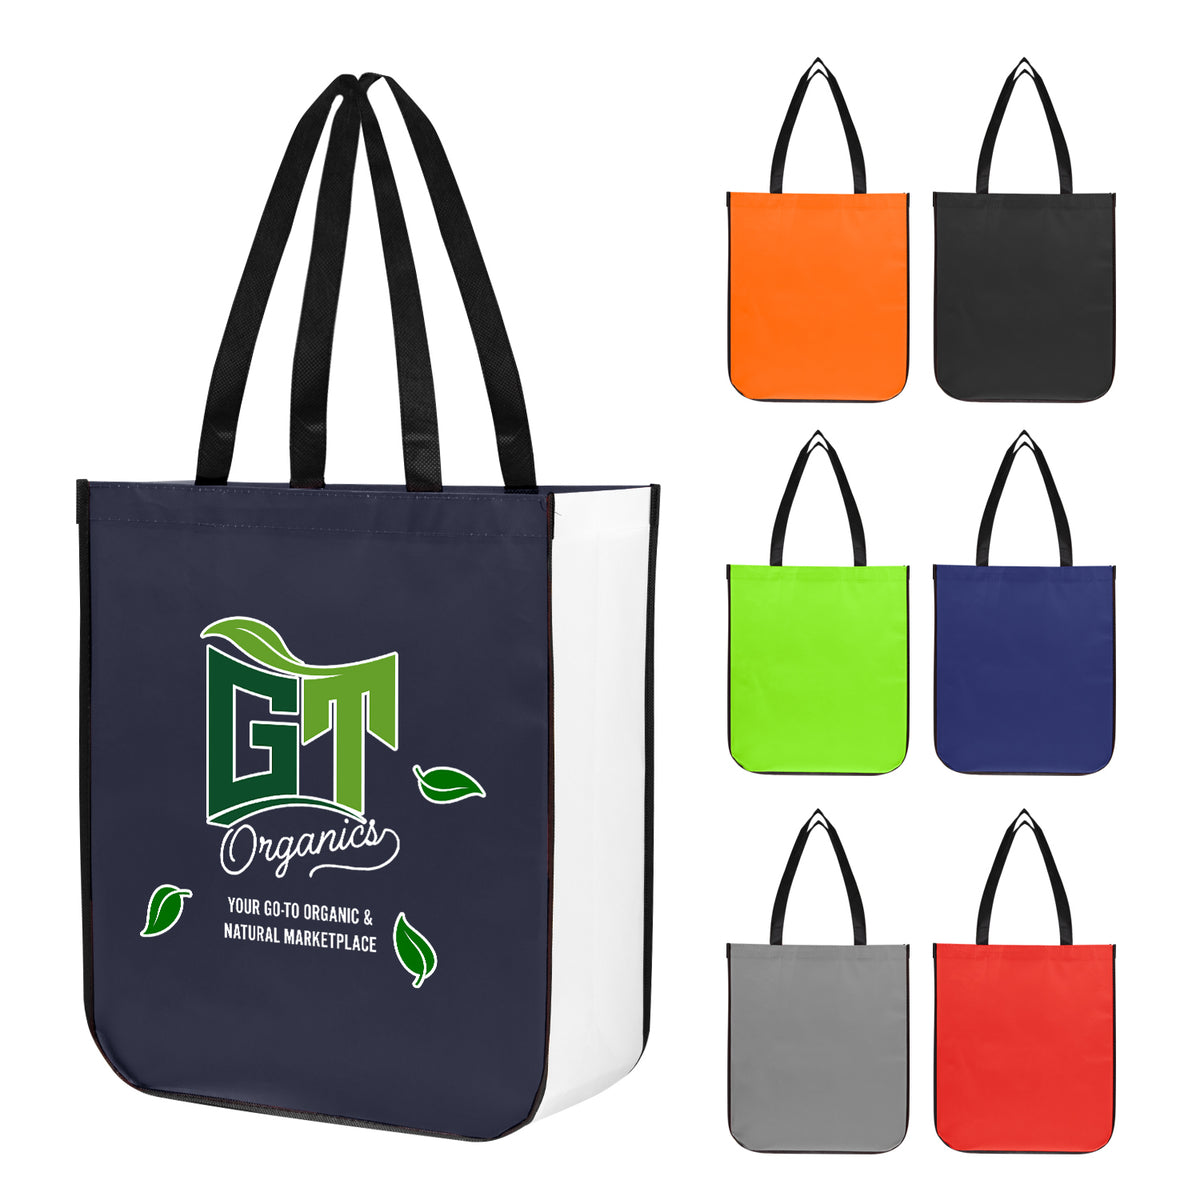 Jumbo Lola Laminated Non-Woven Tote Bag with 100% rPET Material